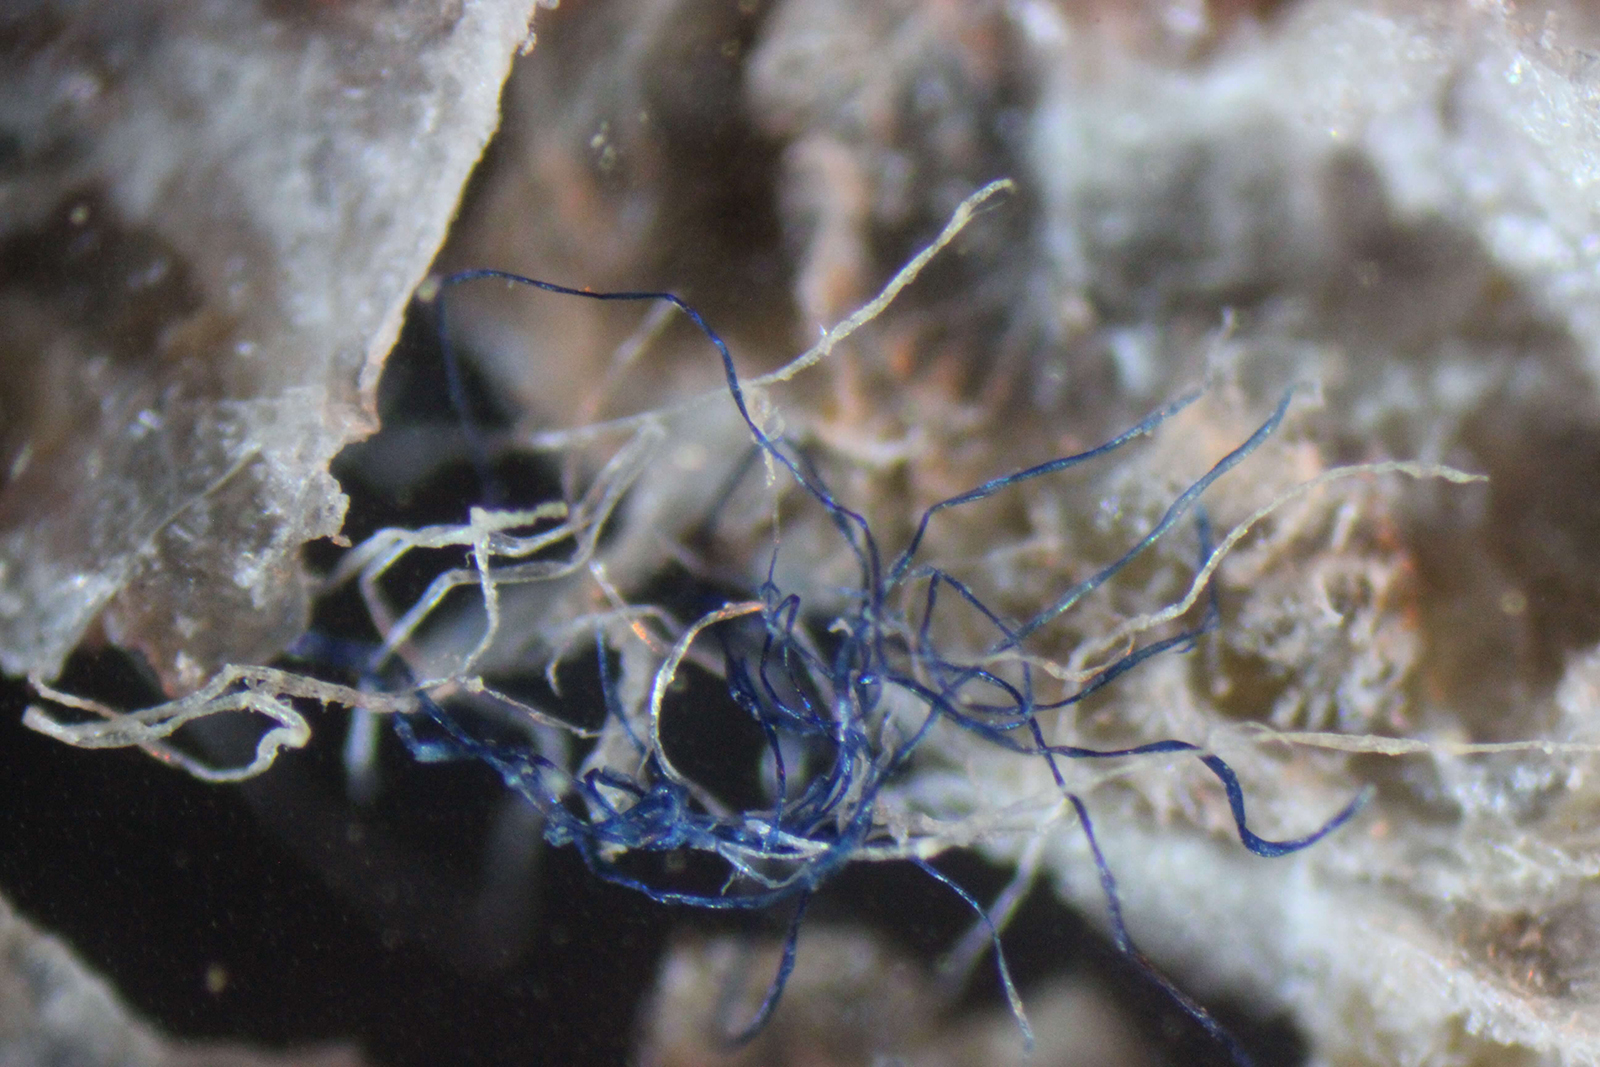 Morgellons disease photo : Blue and white filaments intertwined in a scab